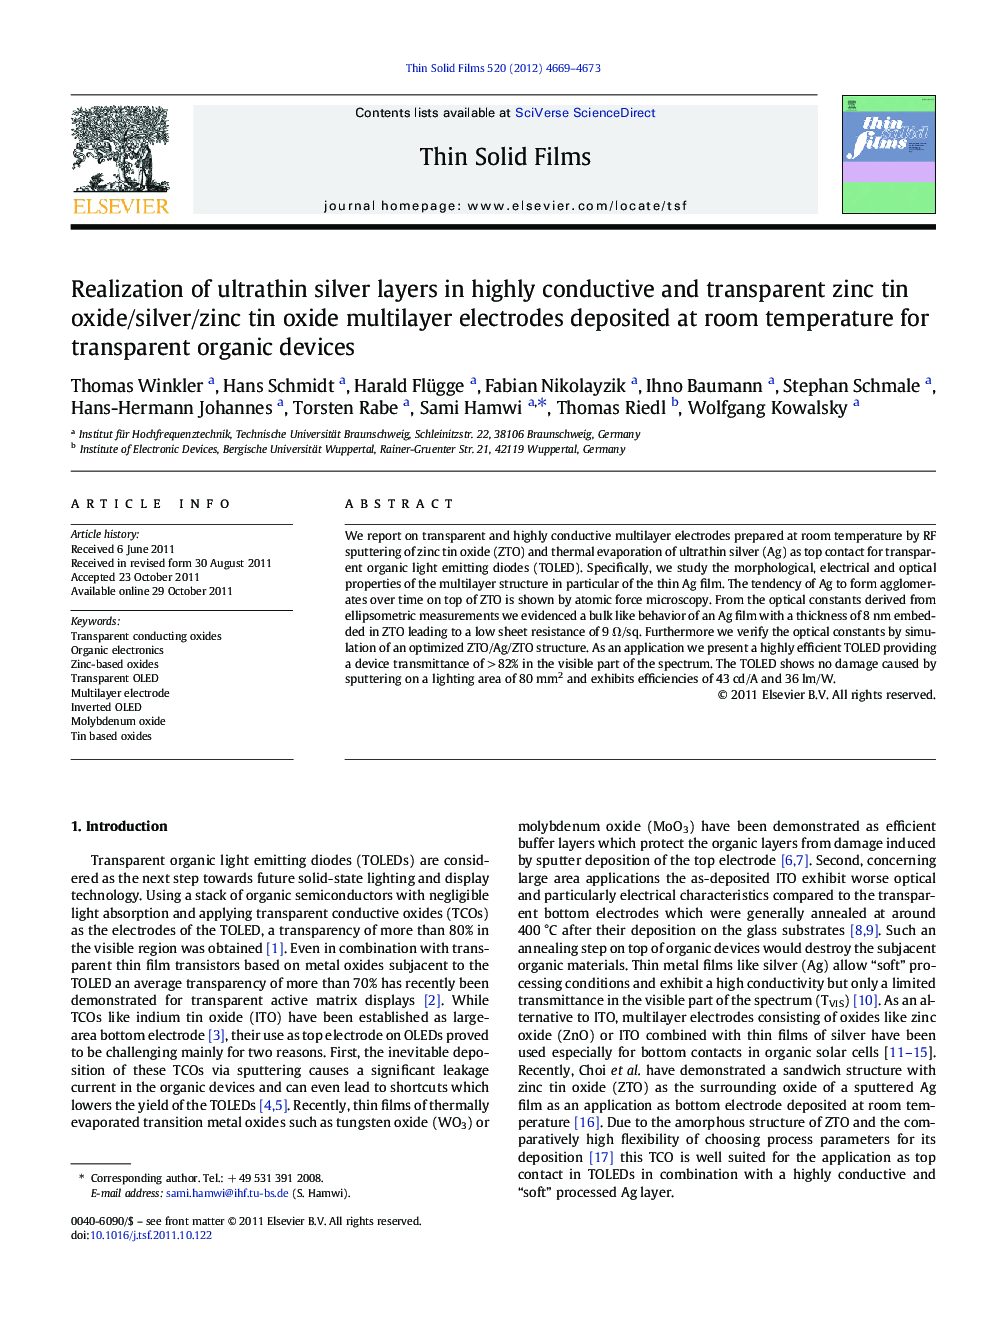 Realization of ultrathin silver layers in highly conductive and transparent zinc tin oxide/silver/zinc tin oxide multilayer electrodes deposited at room temperature for transparent organic devices